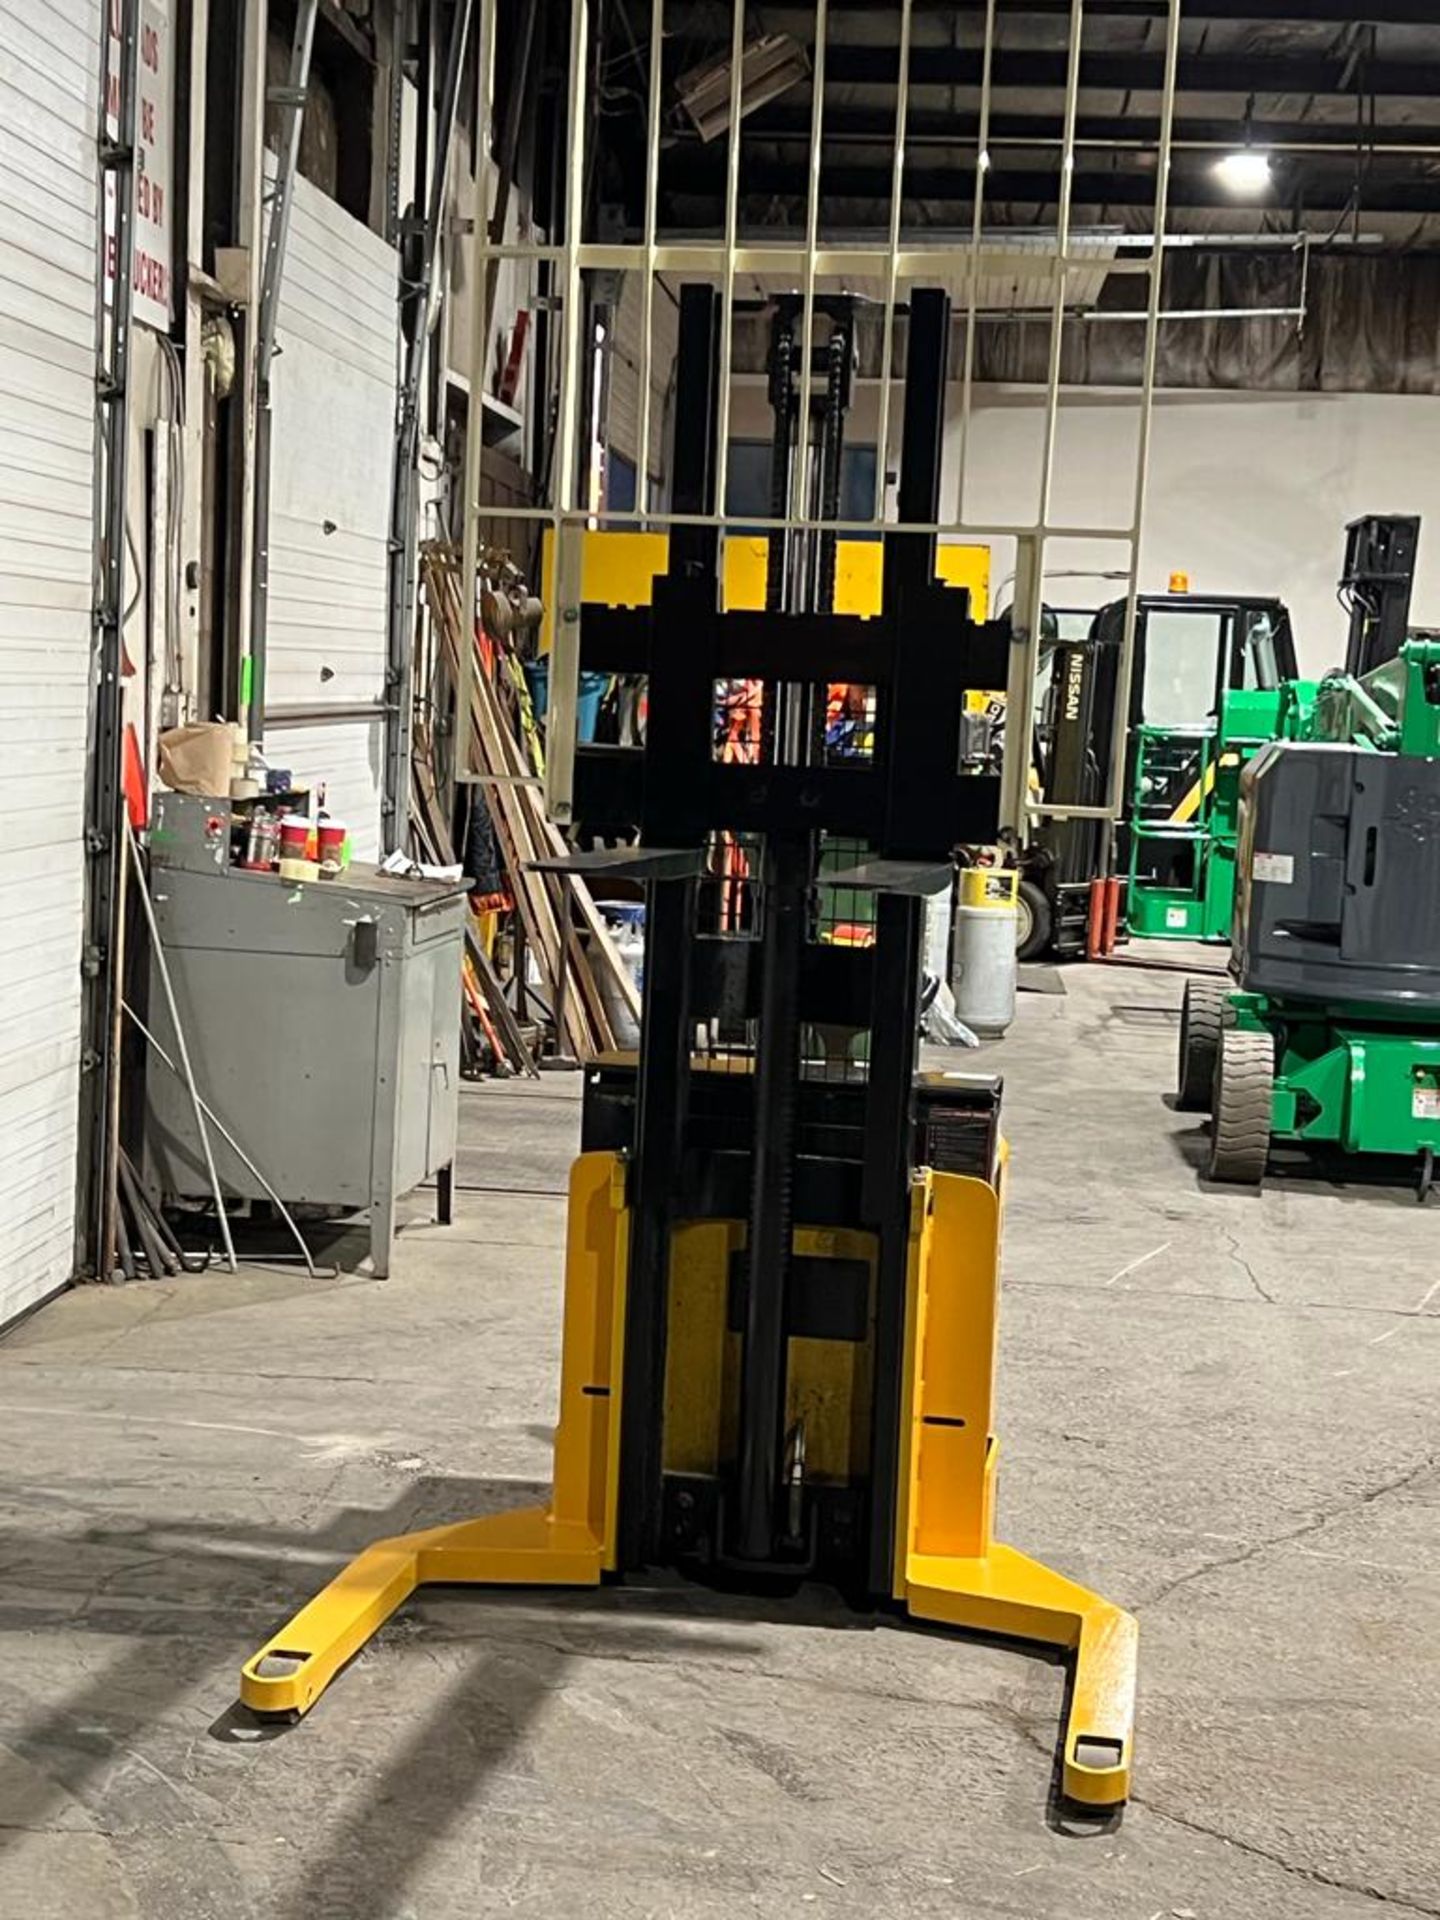 Yale Pallet Stacker Walk Behind 4,000lbs capacity electric Powered Pallet Cart 24V - FREE CUSTOMS